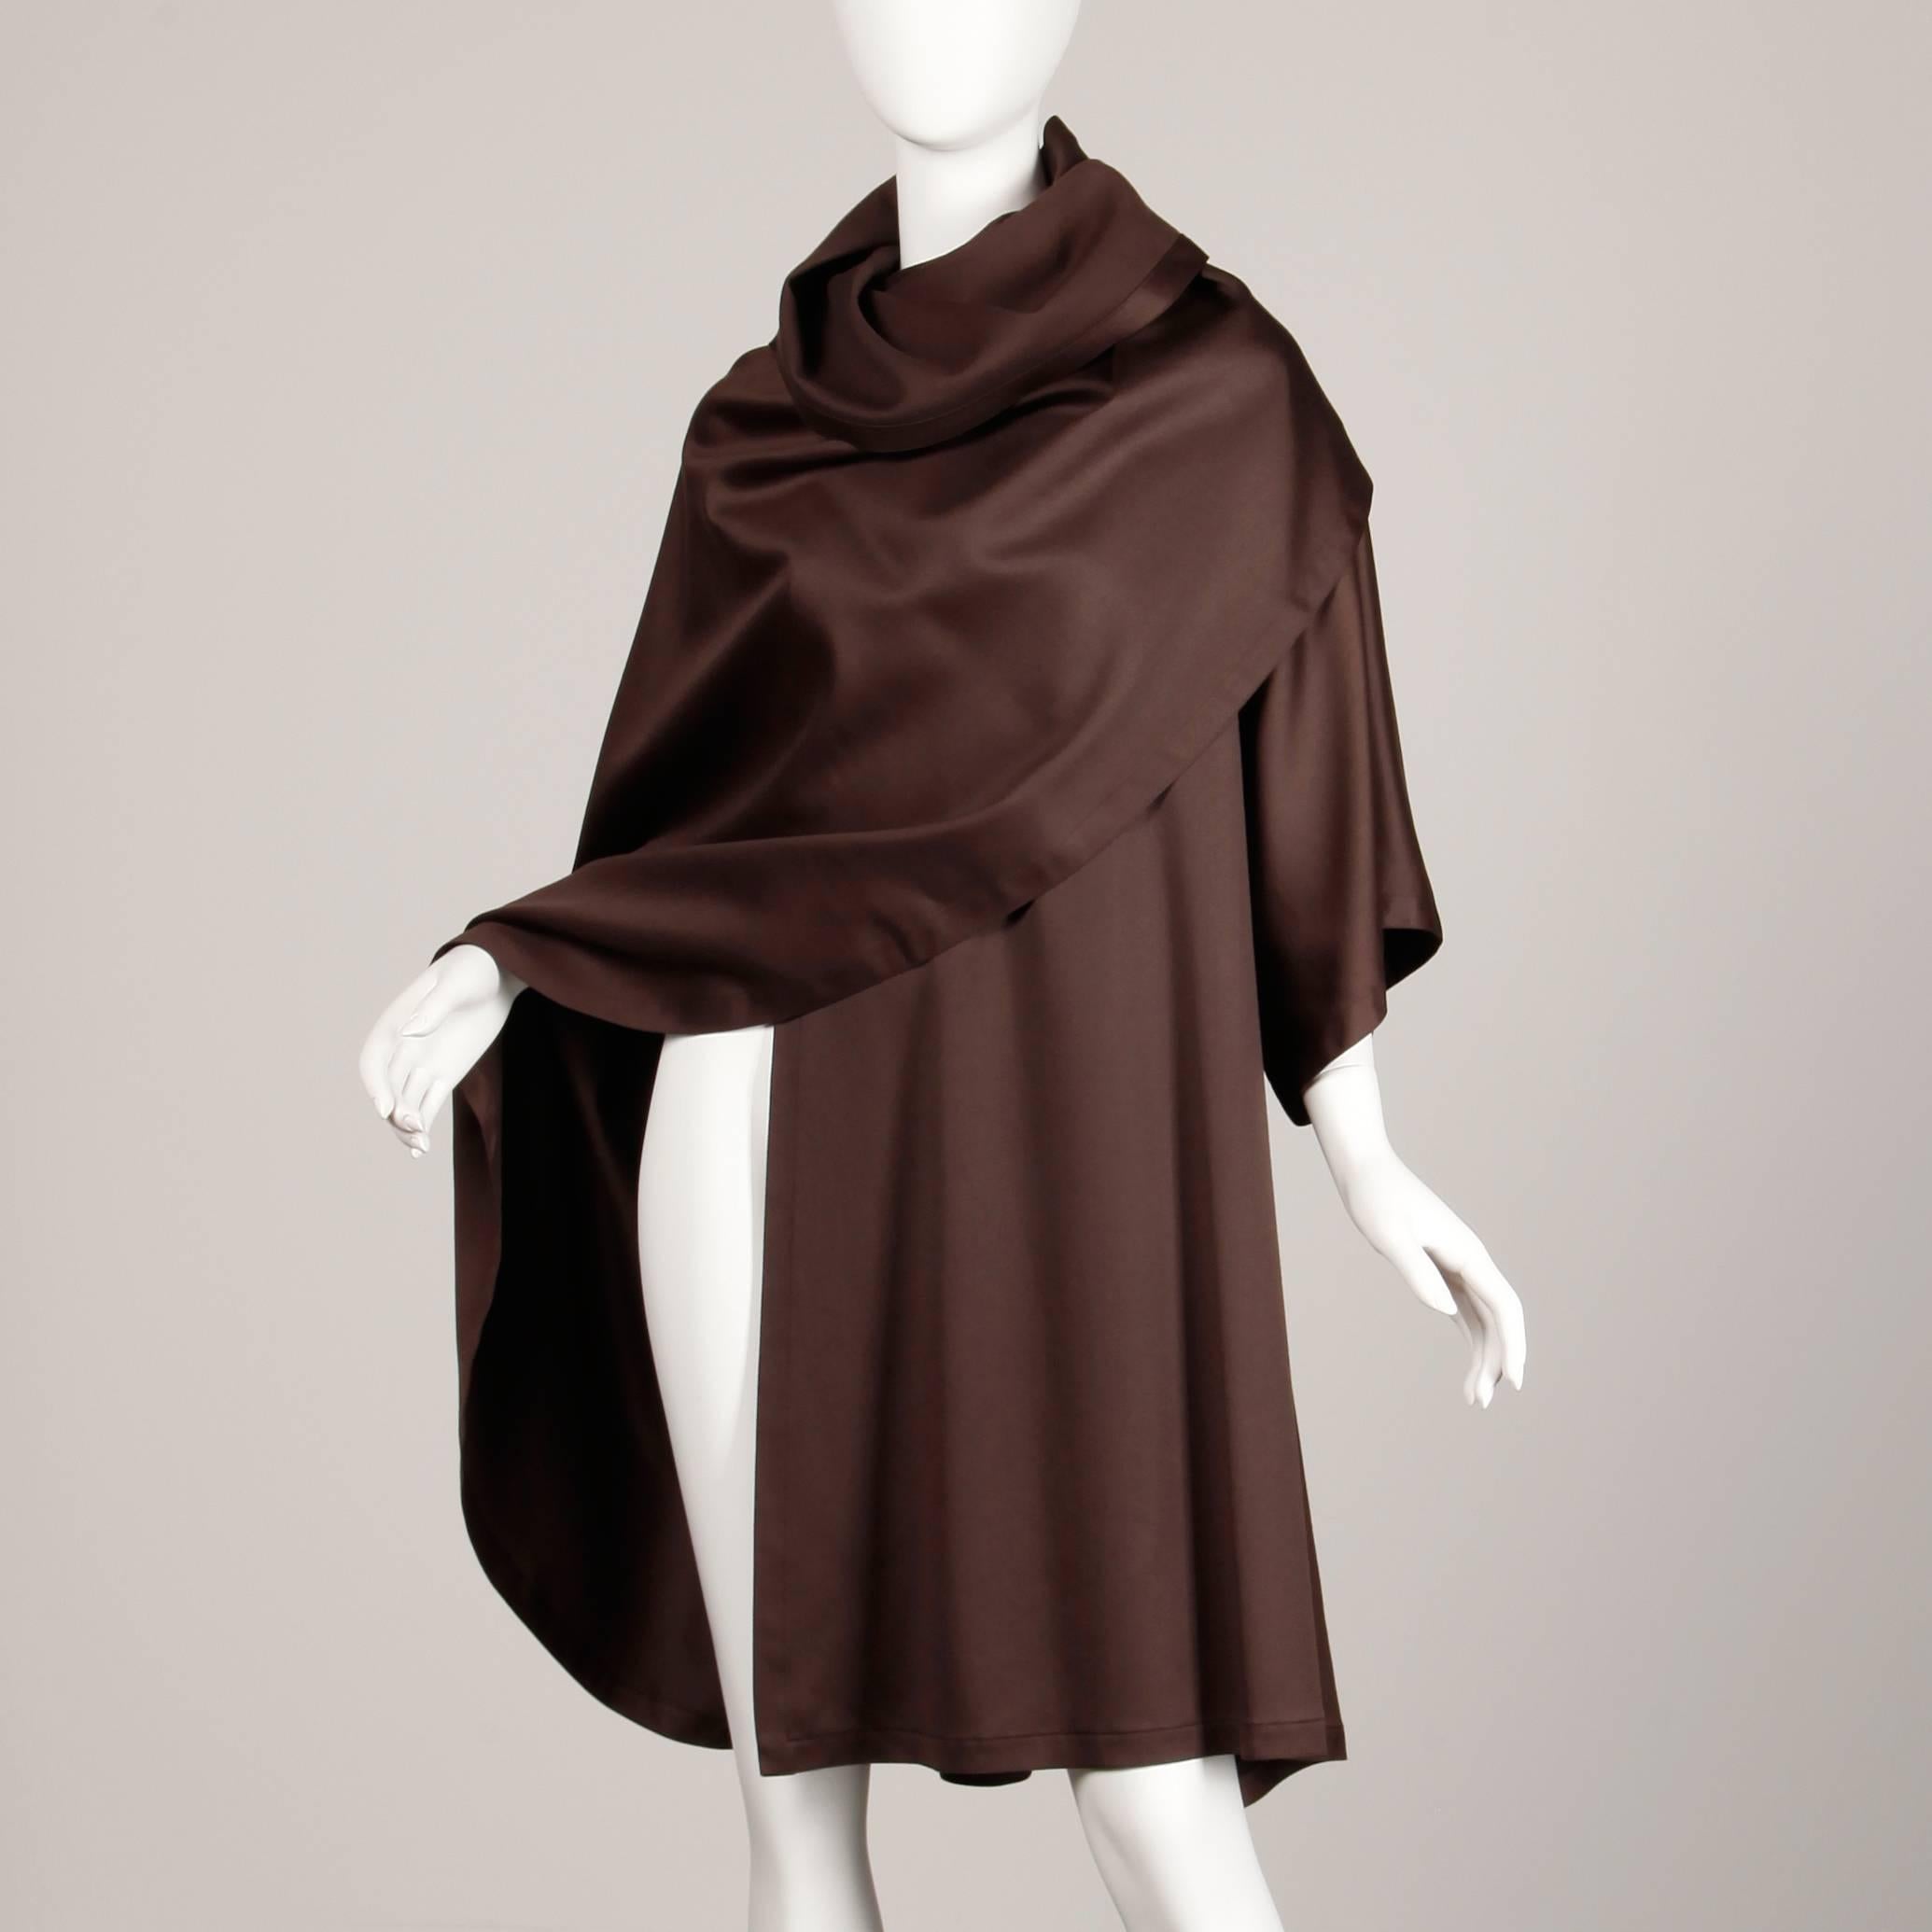 Bernard Perris Vintage Brown Wool / Silk Avant Garde Cape Coat, 1980s  In Excellent Condition For Sale In Sparks, NV